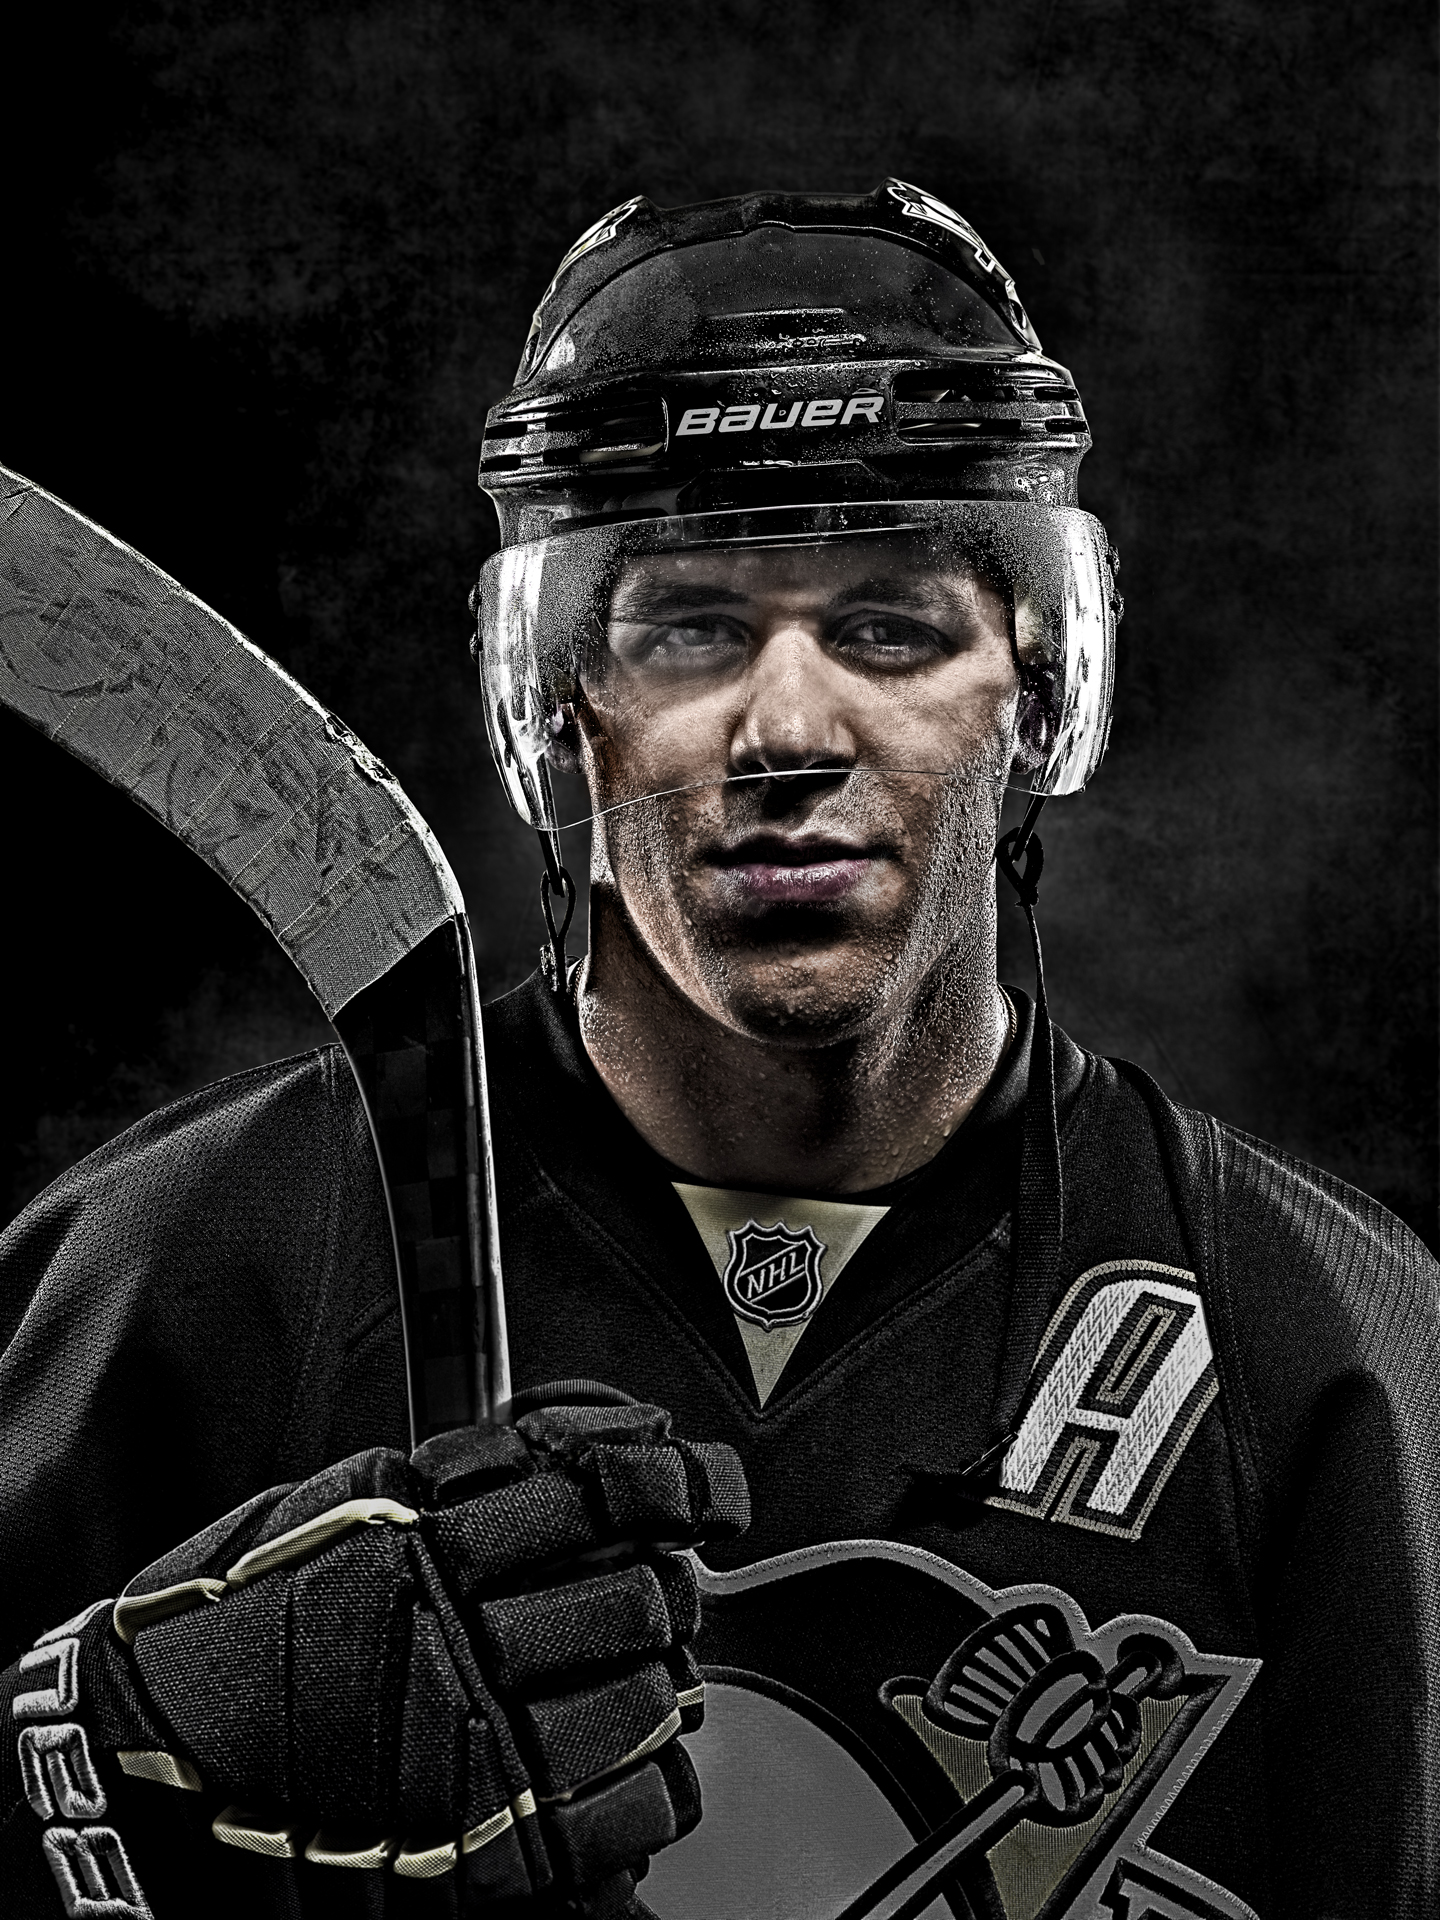 pm_malkin_0090_face_cover_ip11